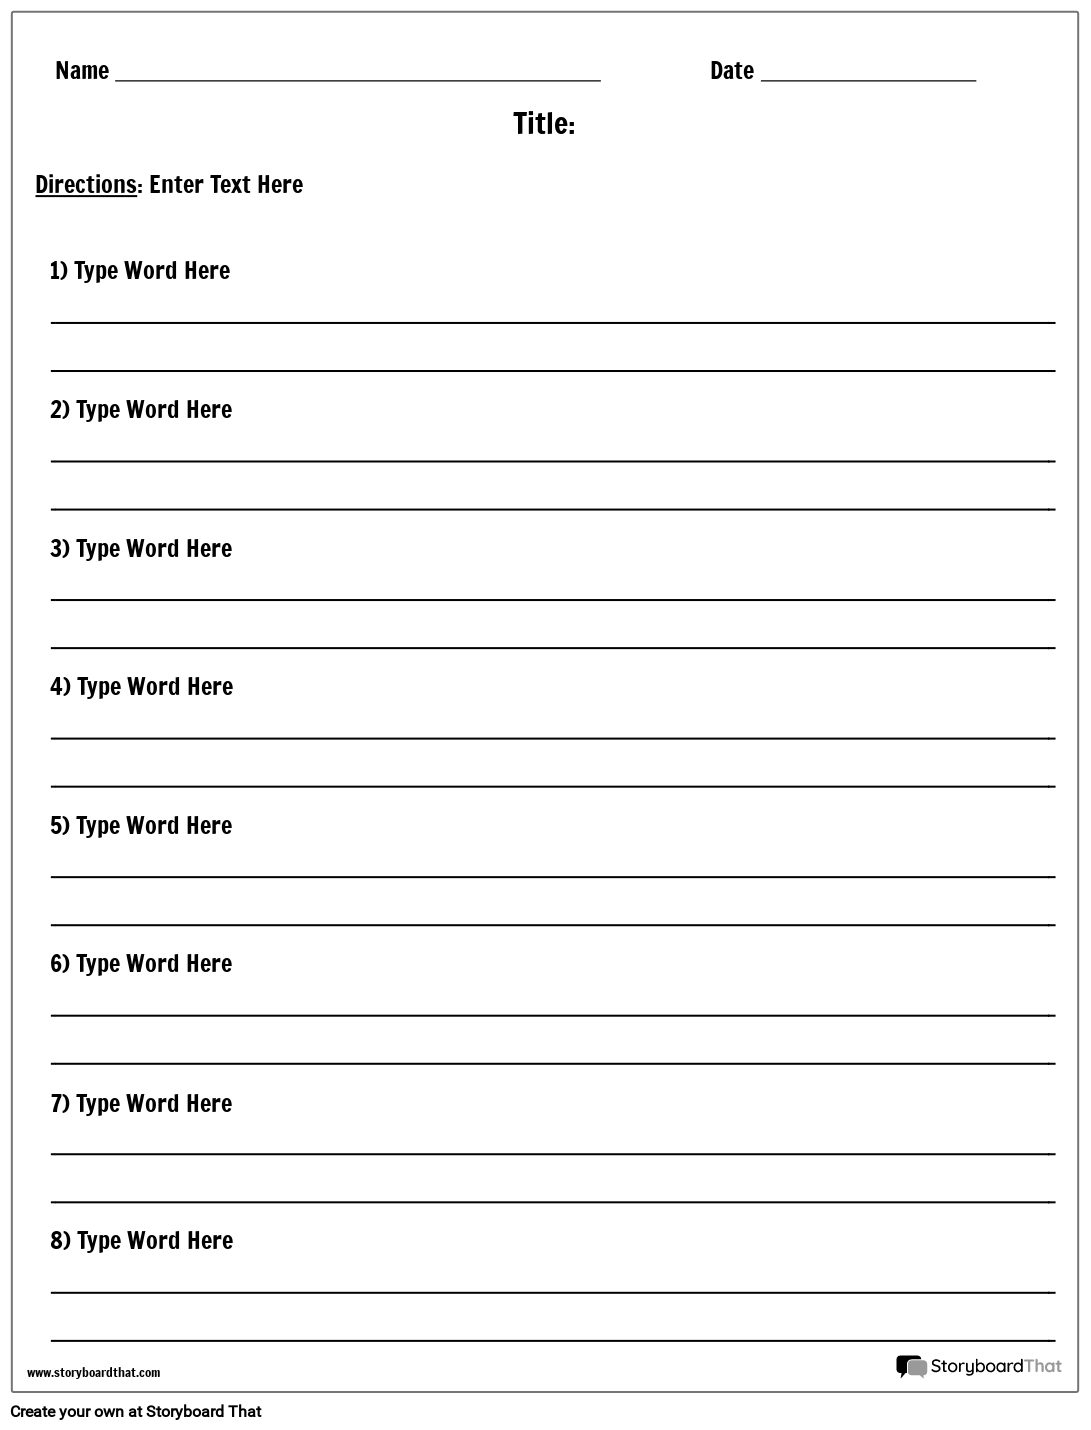 vocabulary-word-worksheet-template